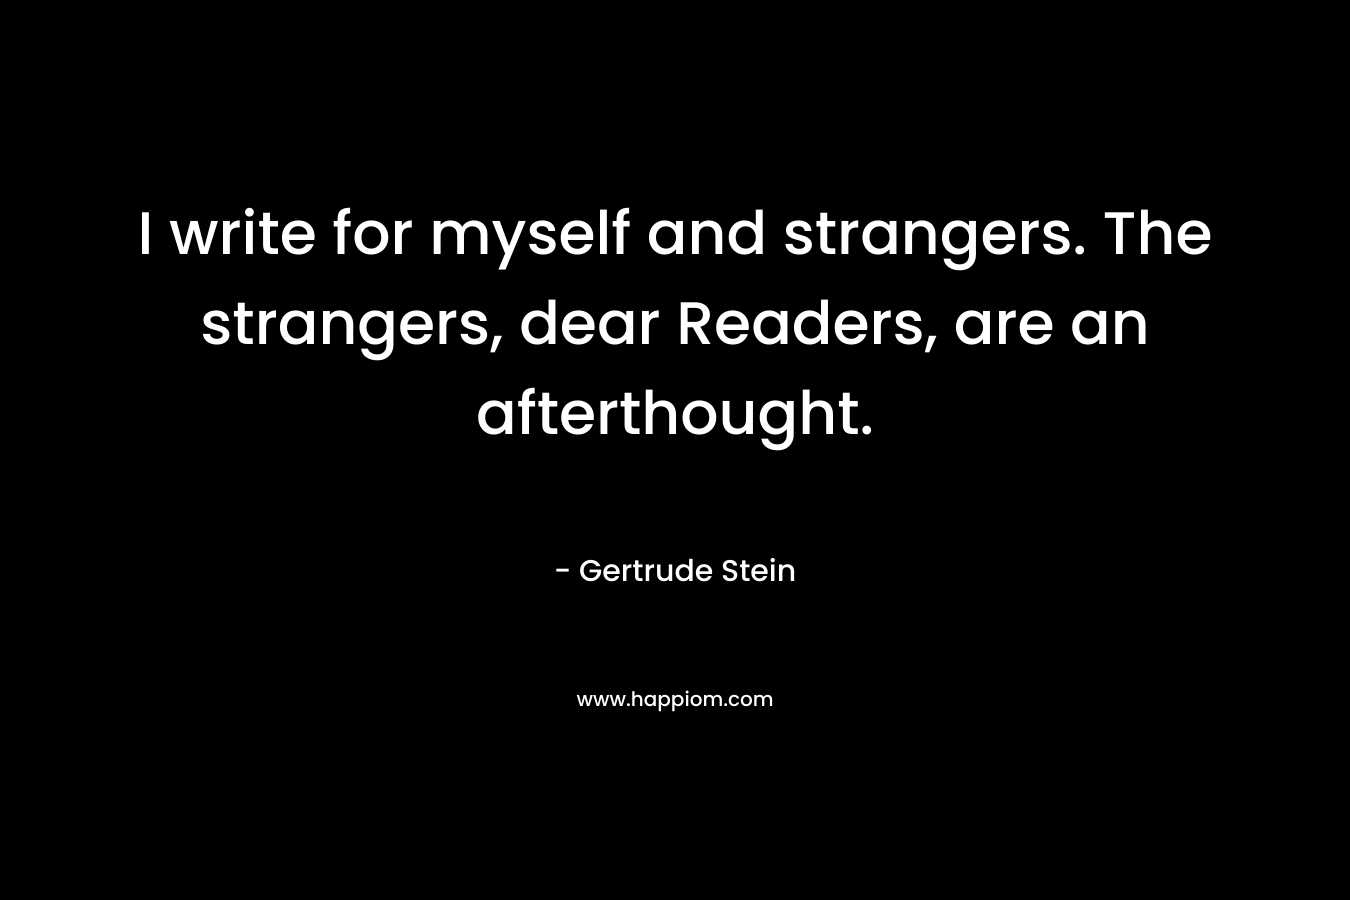 I write for myself and strangers. The strangers, dear Readers, are an afterthought. – Gertrude Stein